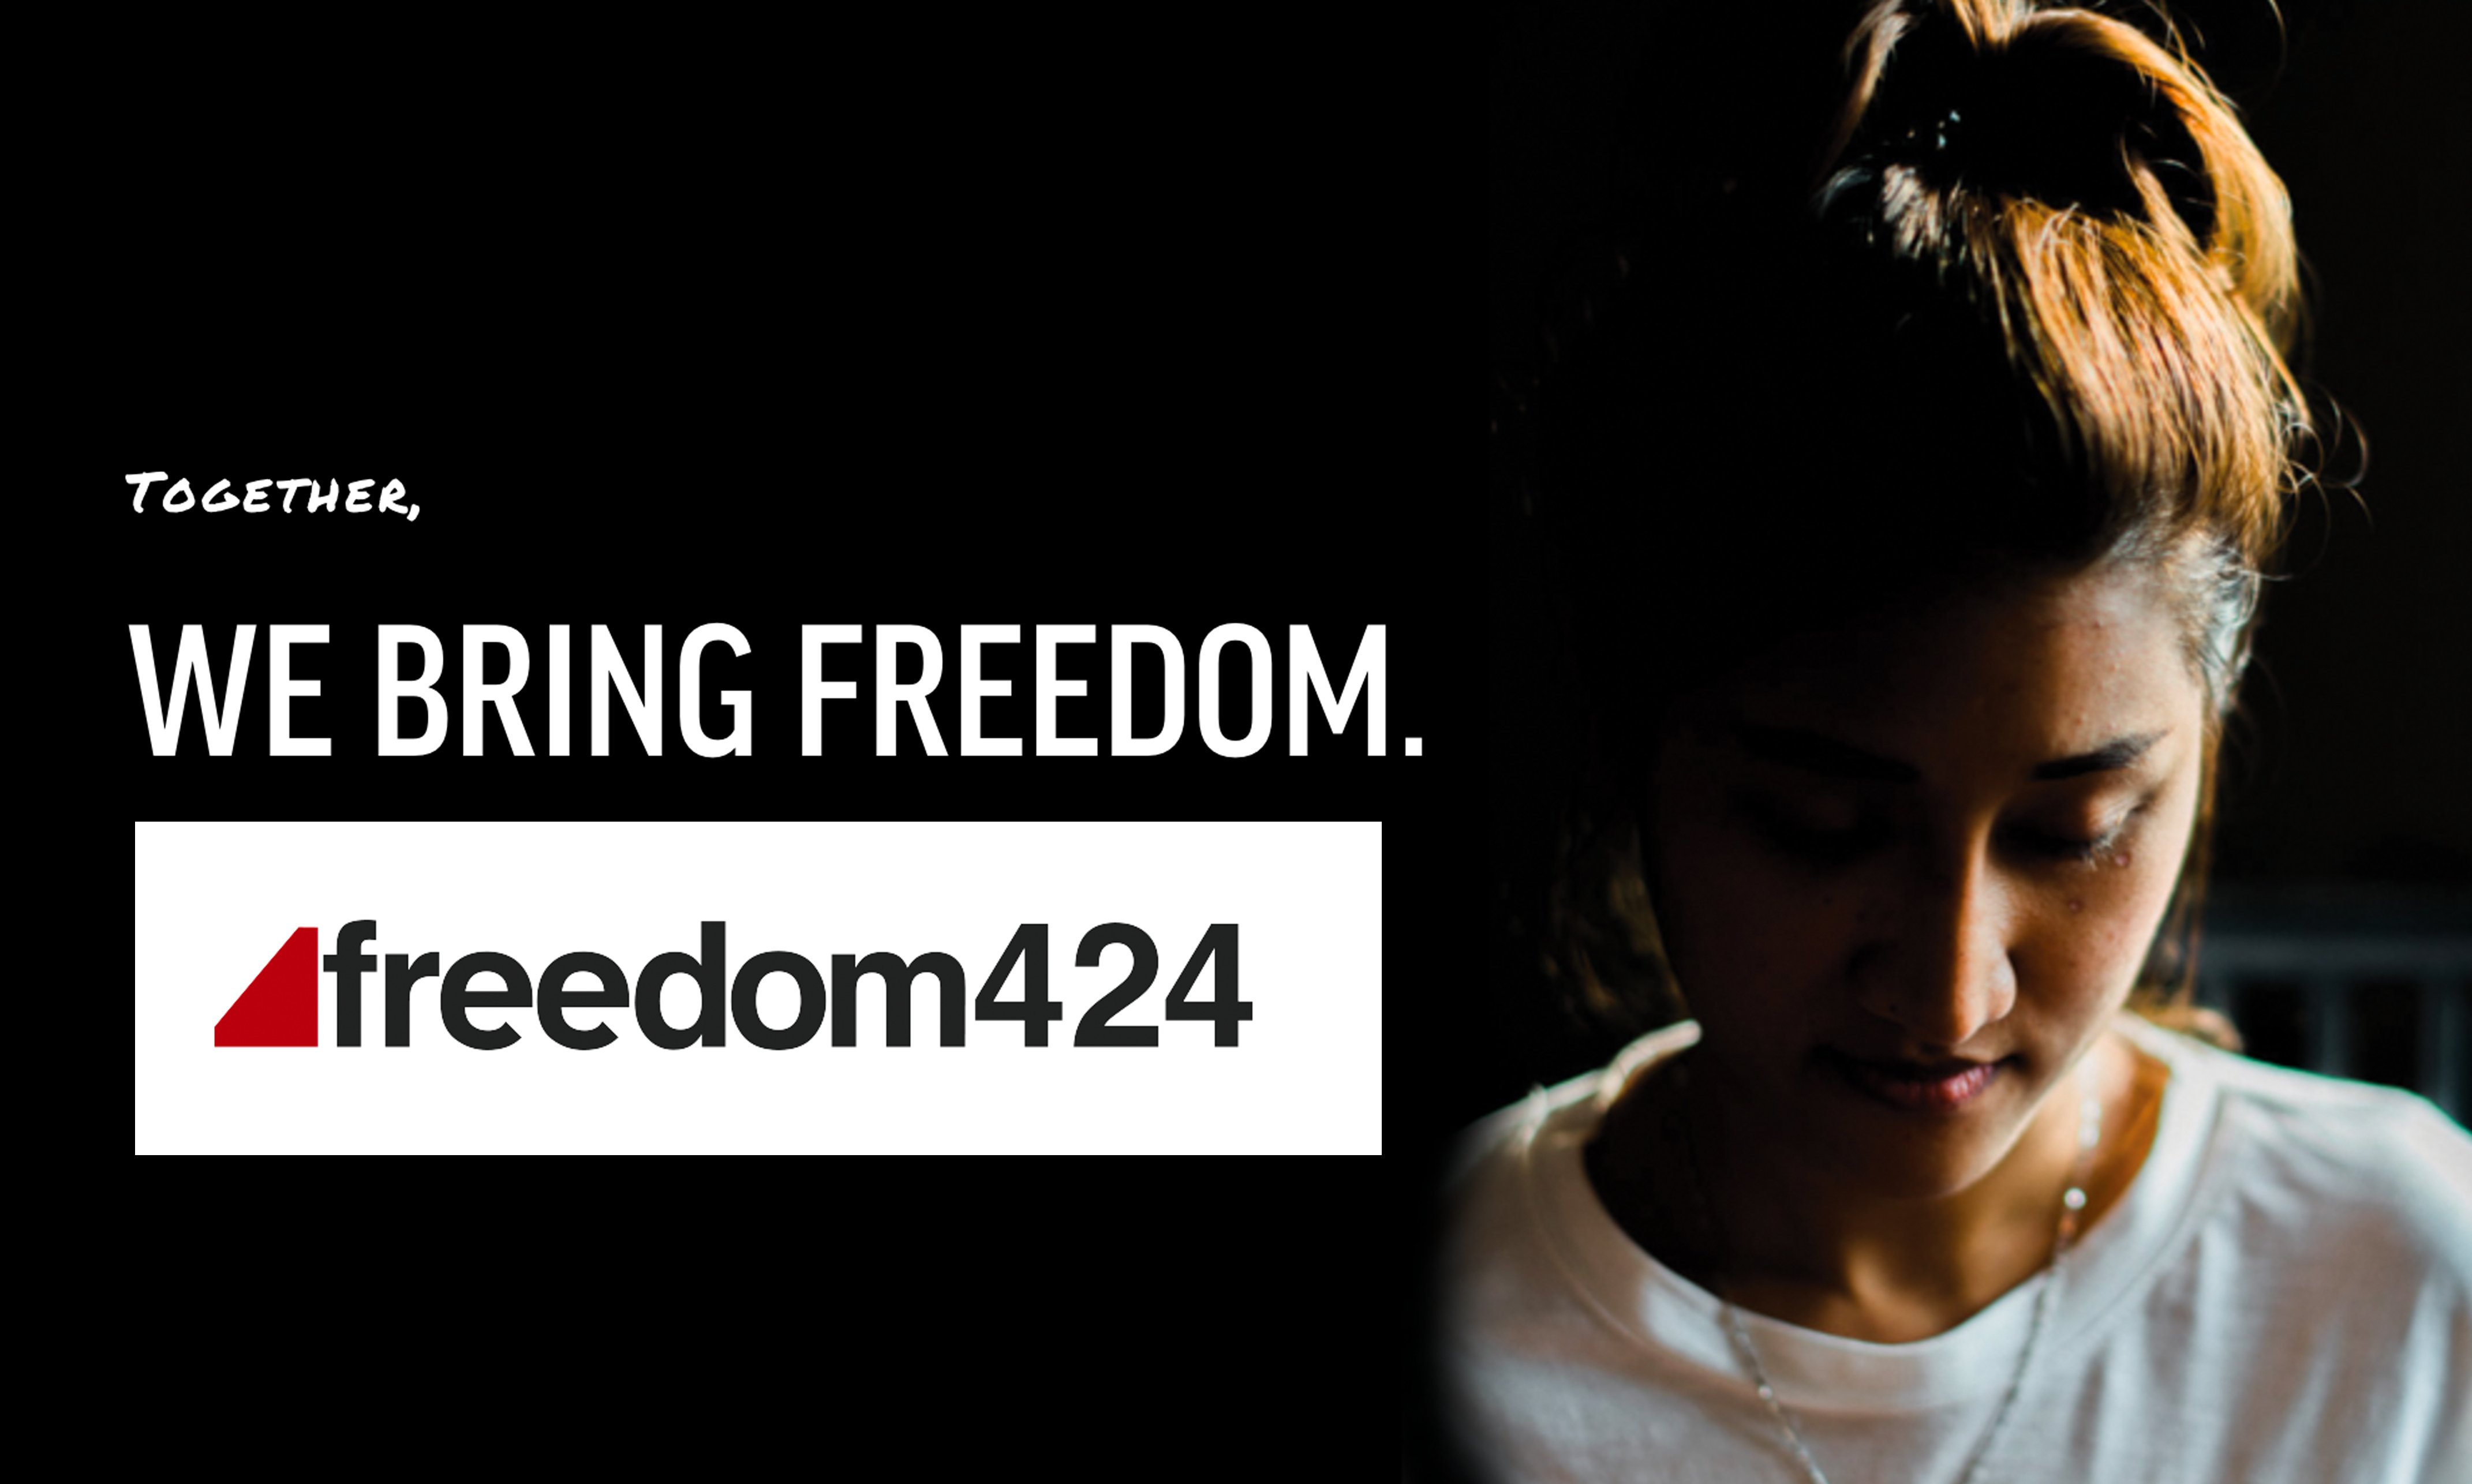 CWC 3.11.2021 - Freedom 424 Ending Human Trafficking at Home and Abroad